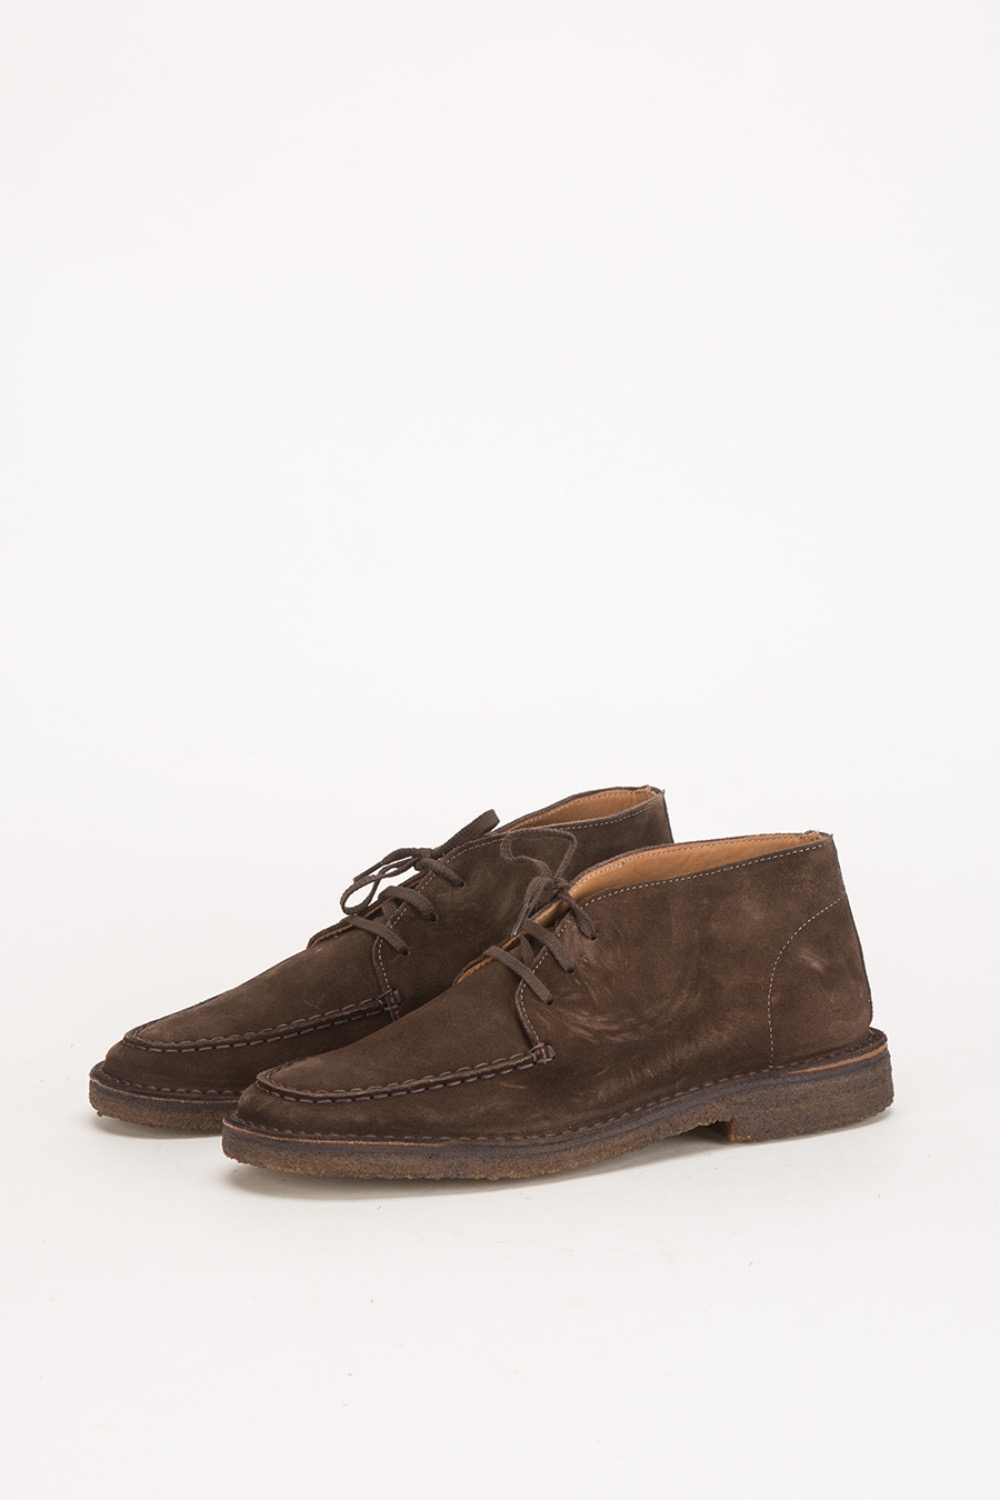 (CARRY OVER)CROSBY MOC-TOE CHUKKA BOOT DARK BROWN SUEDE